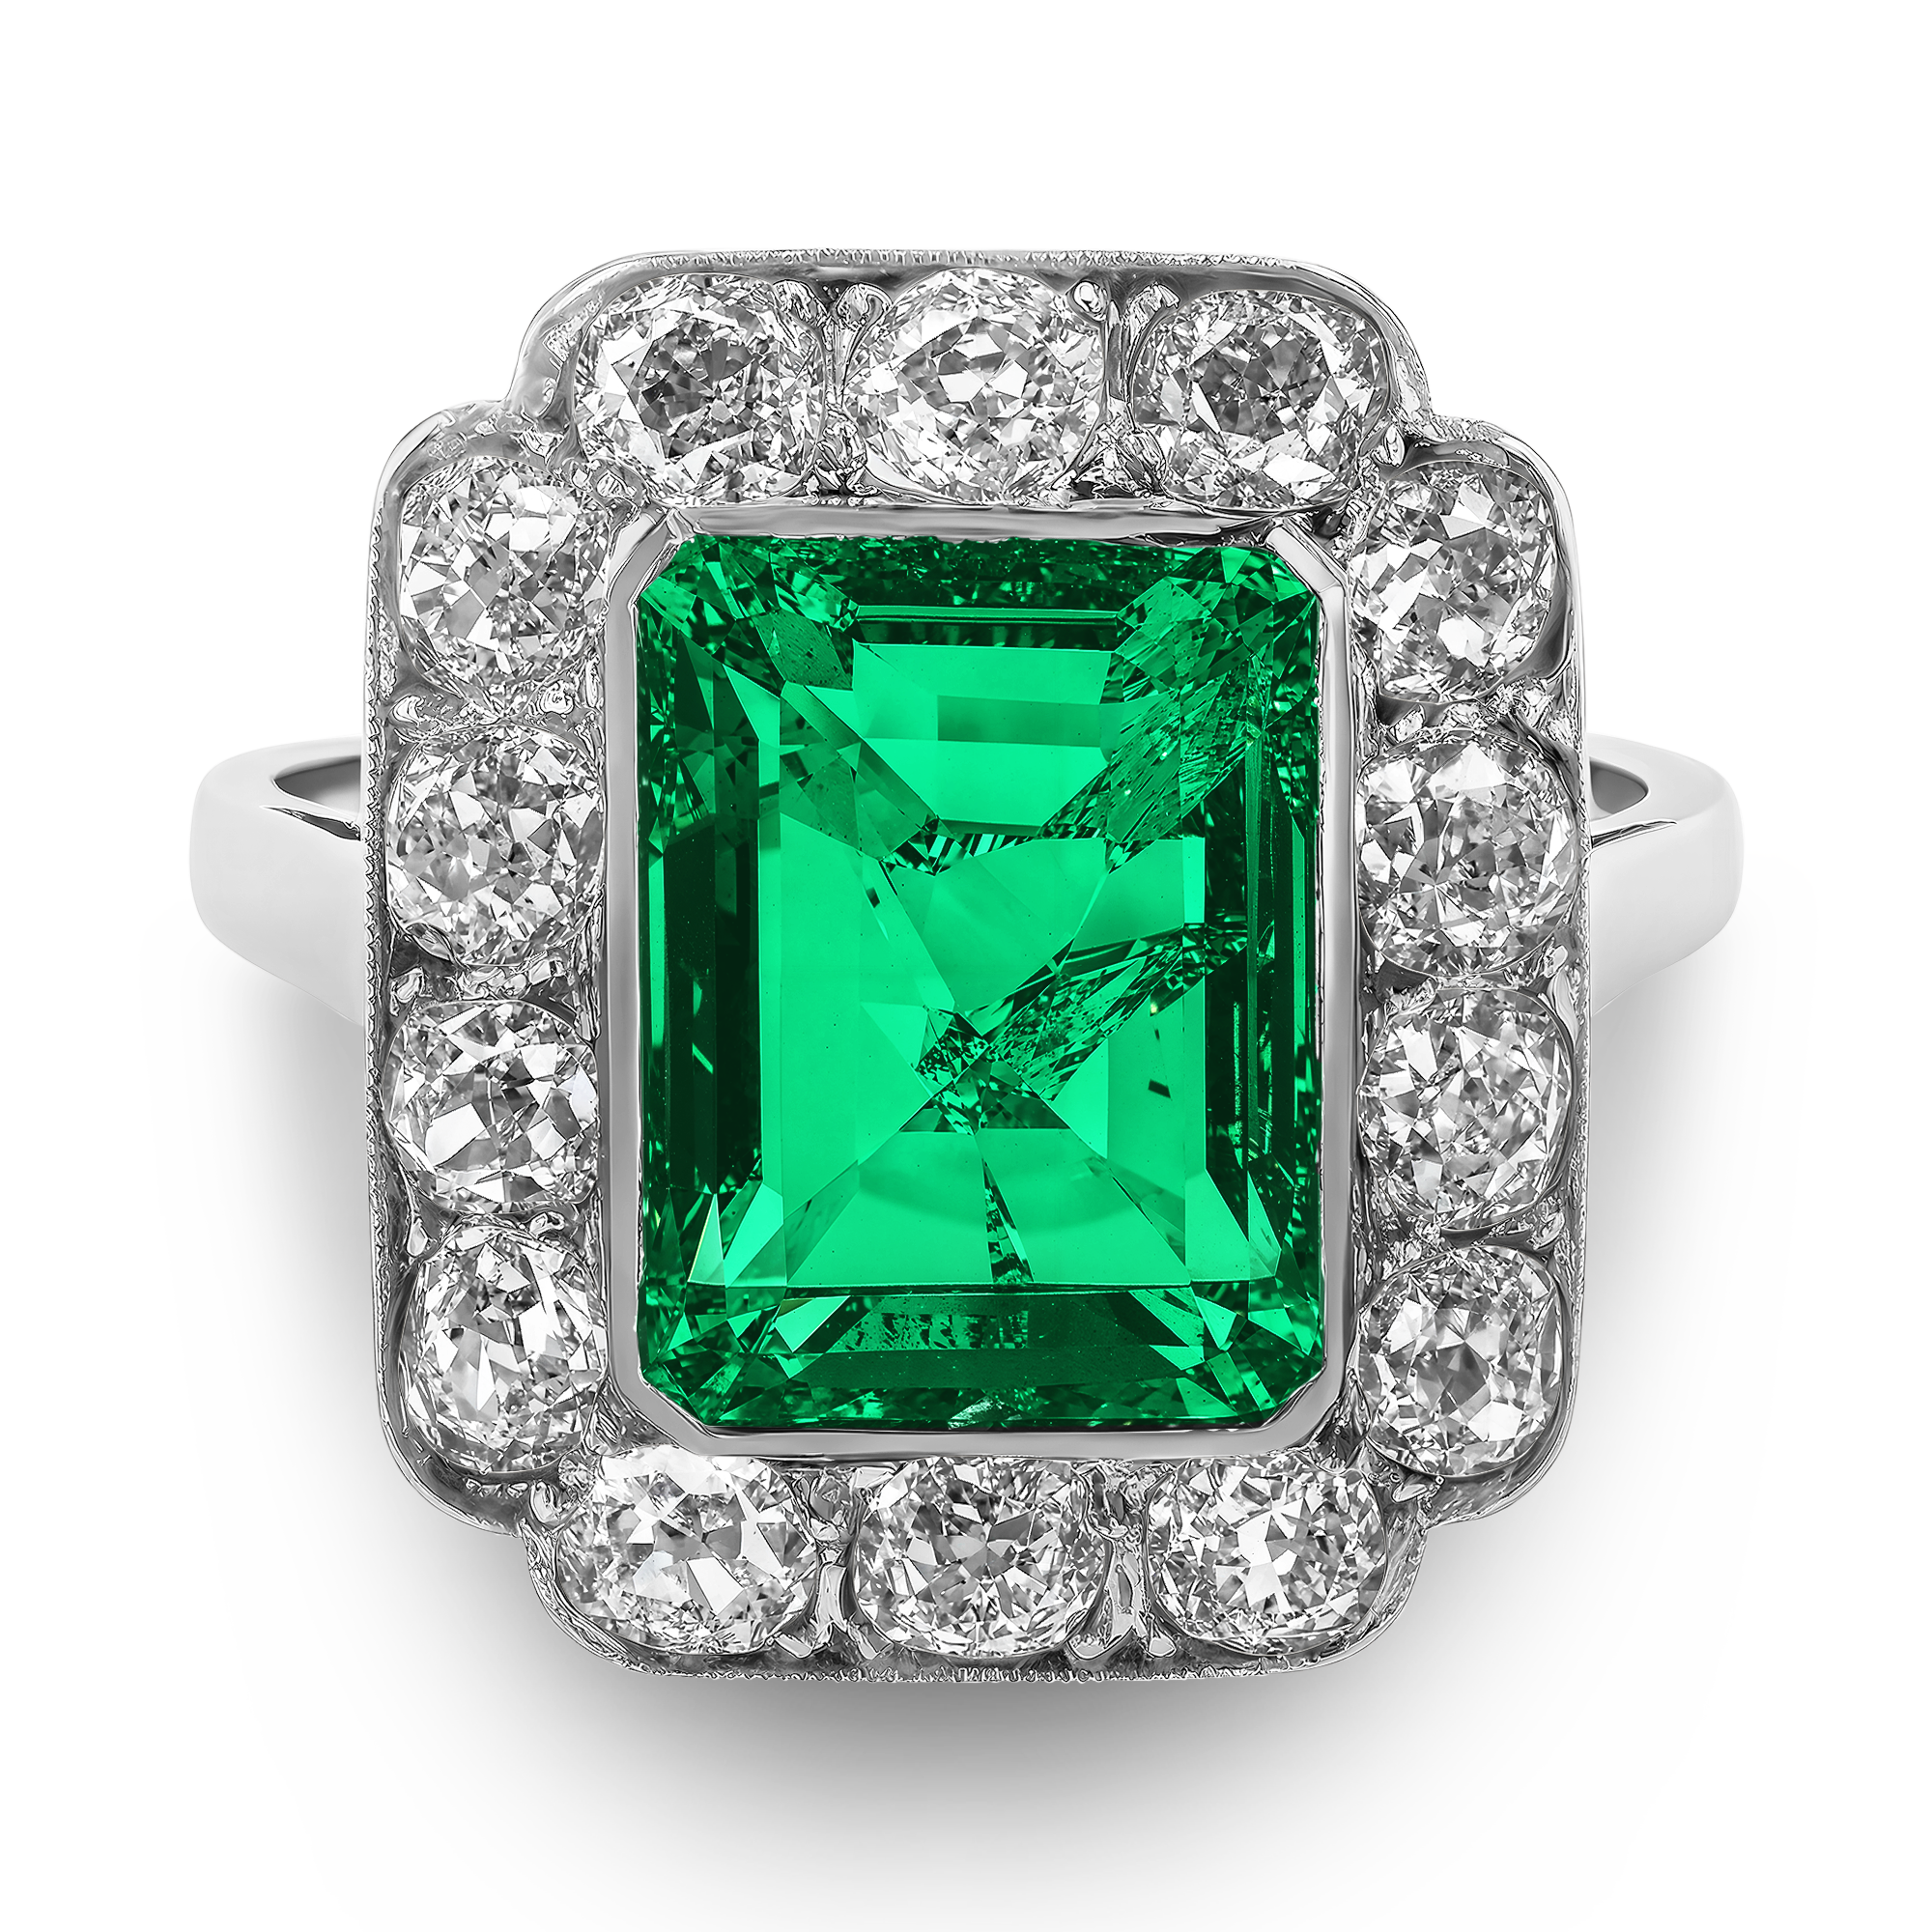 Edwardian 3.41ct Emerald and Diamond Cluster Ring Emerald Cut, Rubover Set_2